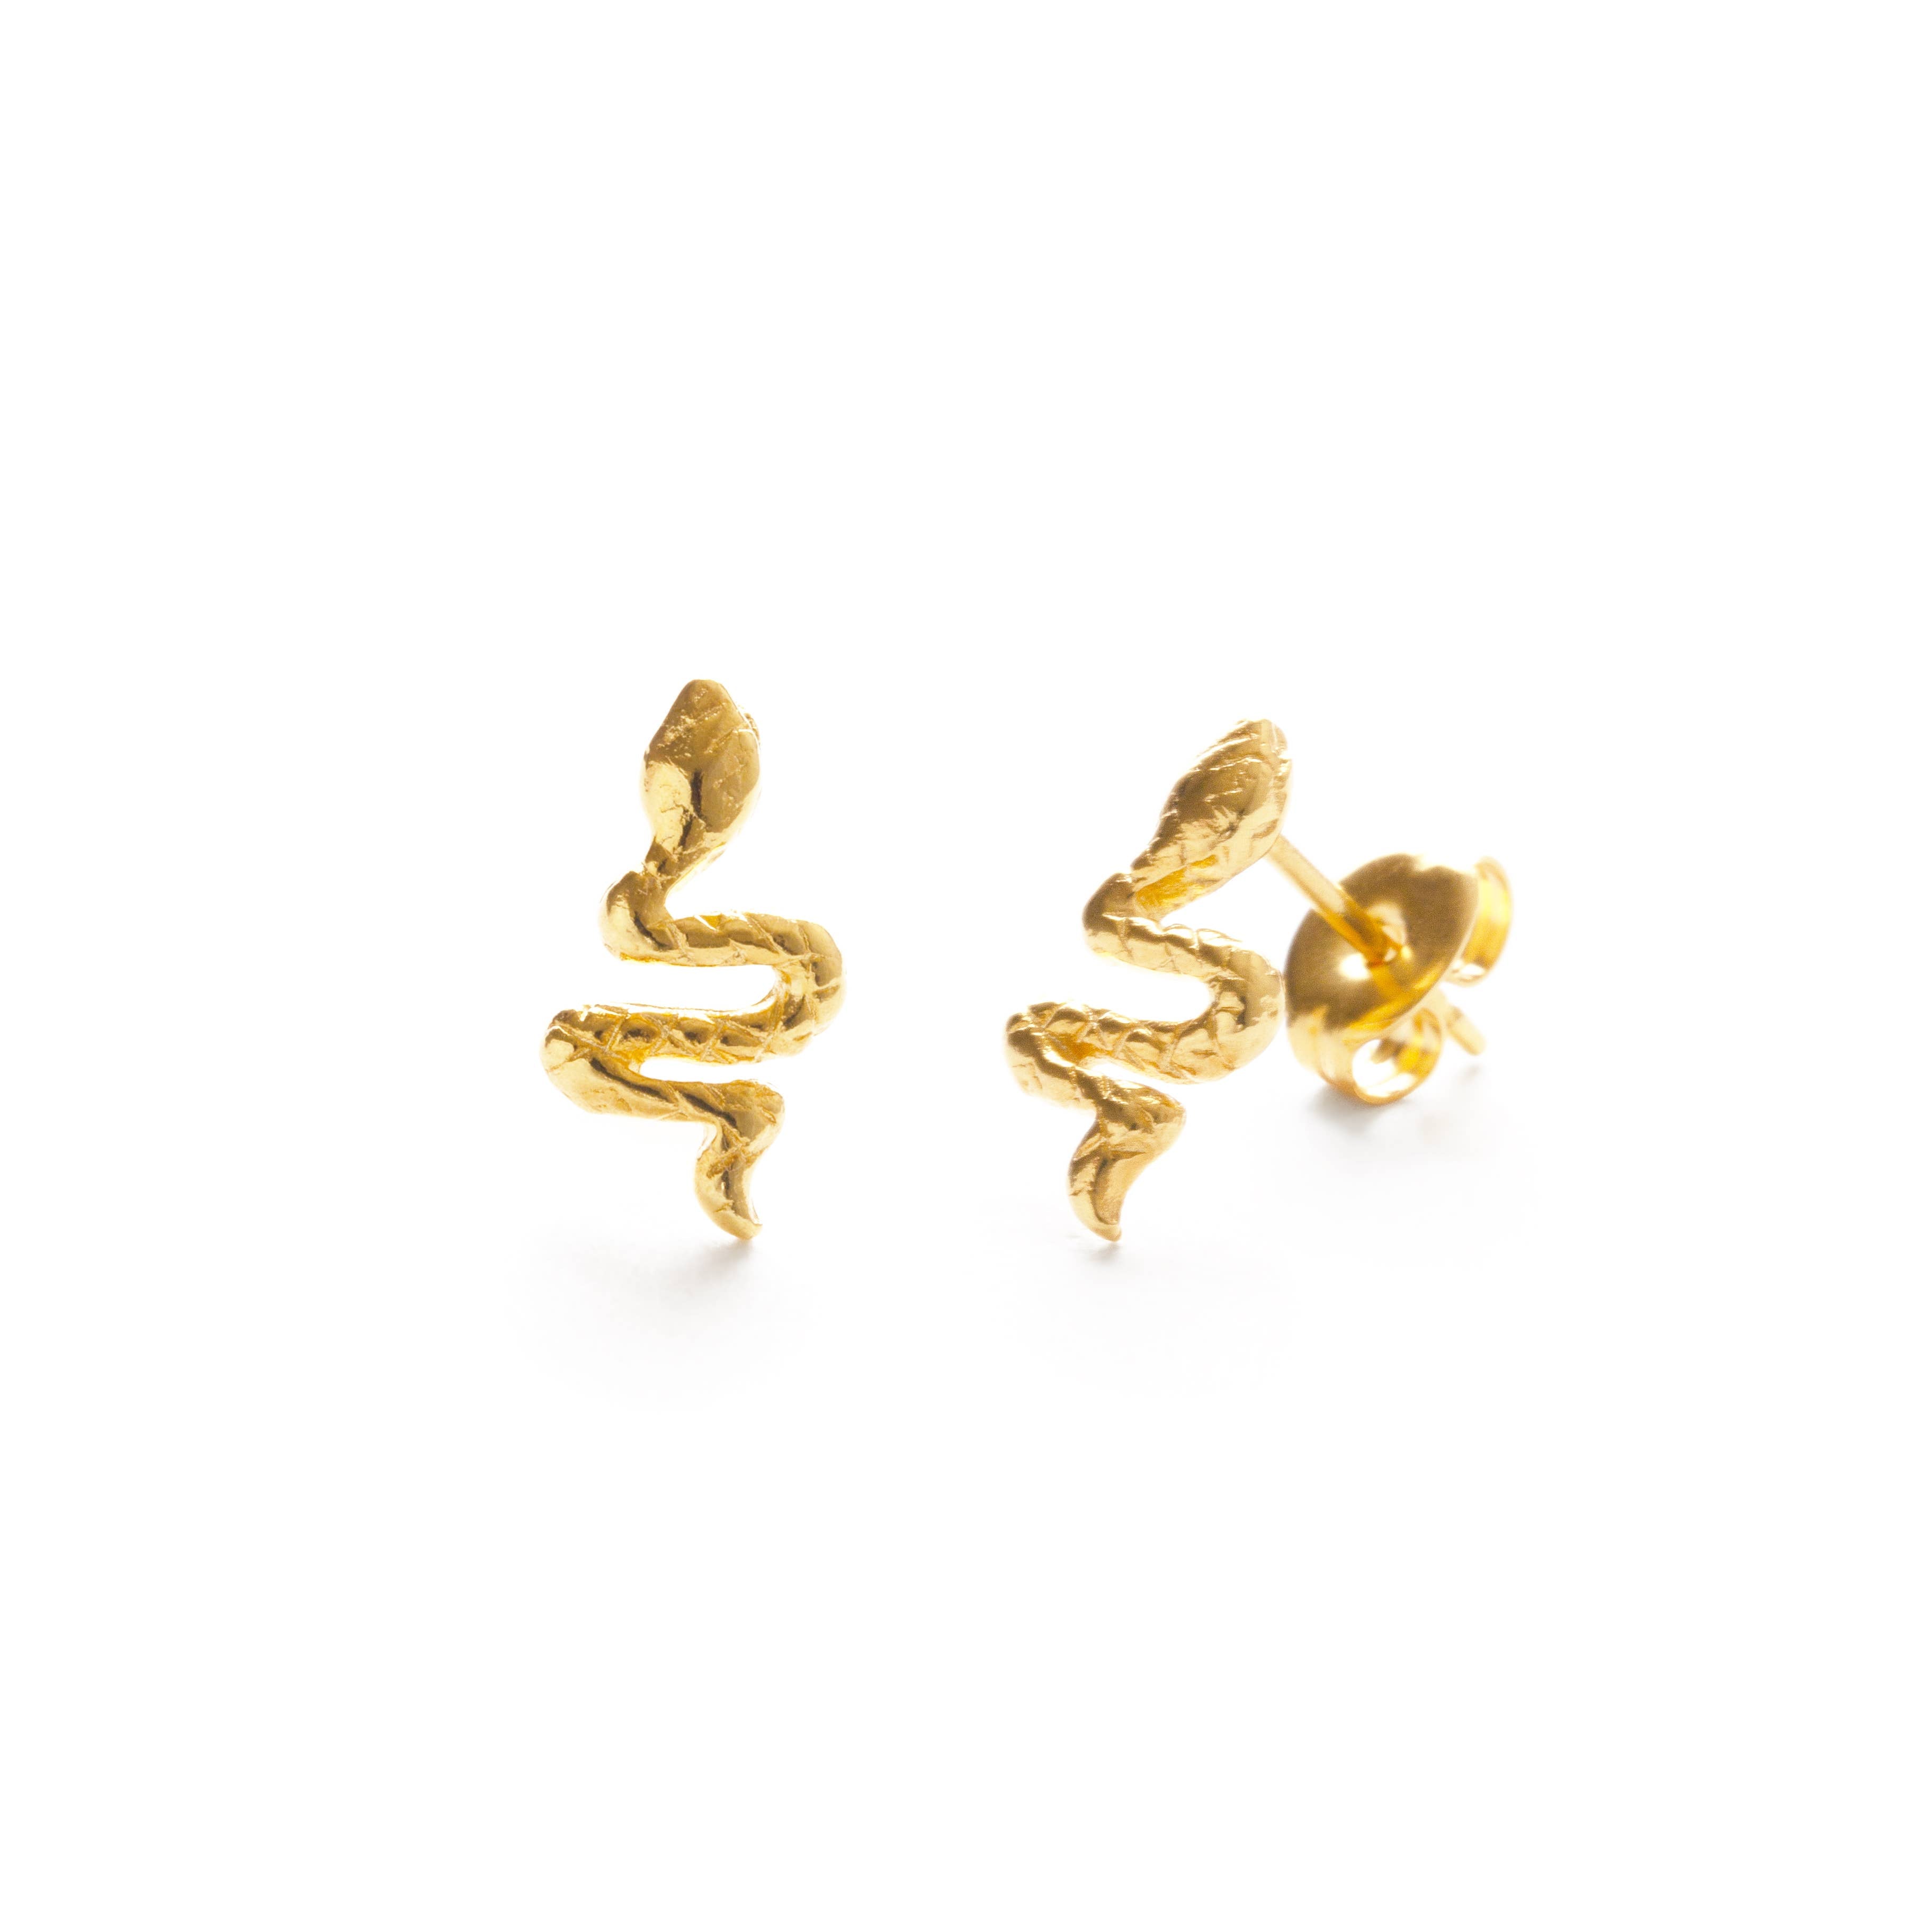 Teeny Tiny Serpent Studs - Out of the Blue